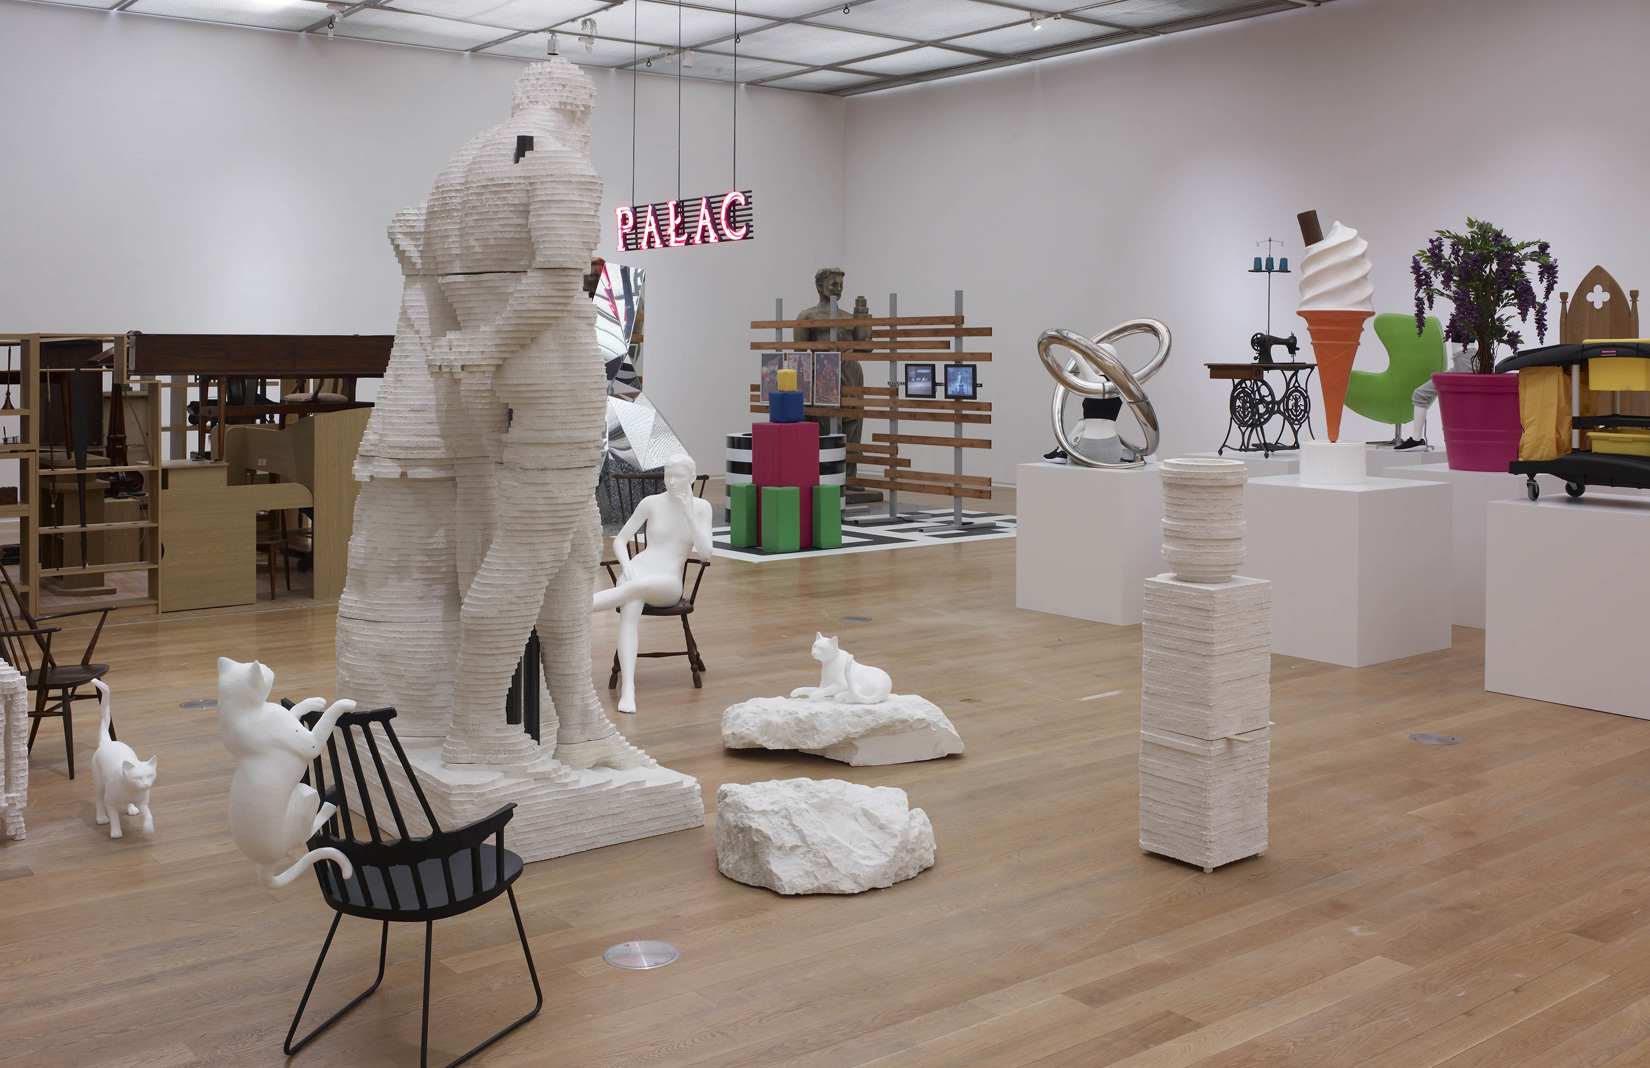 Installation view of Matthew Darbyshire’s An Exhibition for Modern Living at Manchester Art Gallery. Photography: Michael Pollard. Courtesy of the artist and Manchester Art Gallery